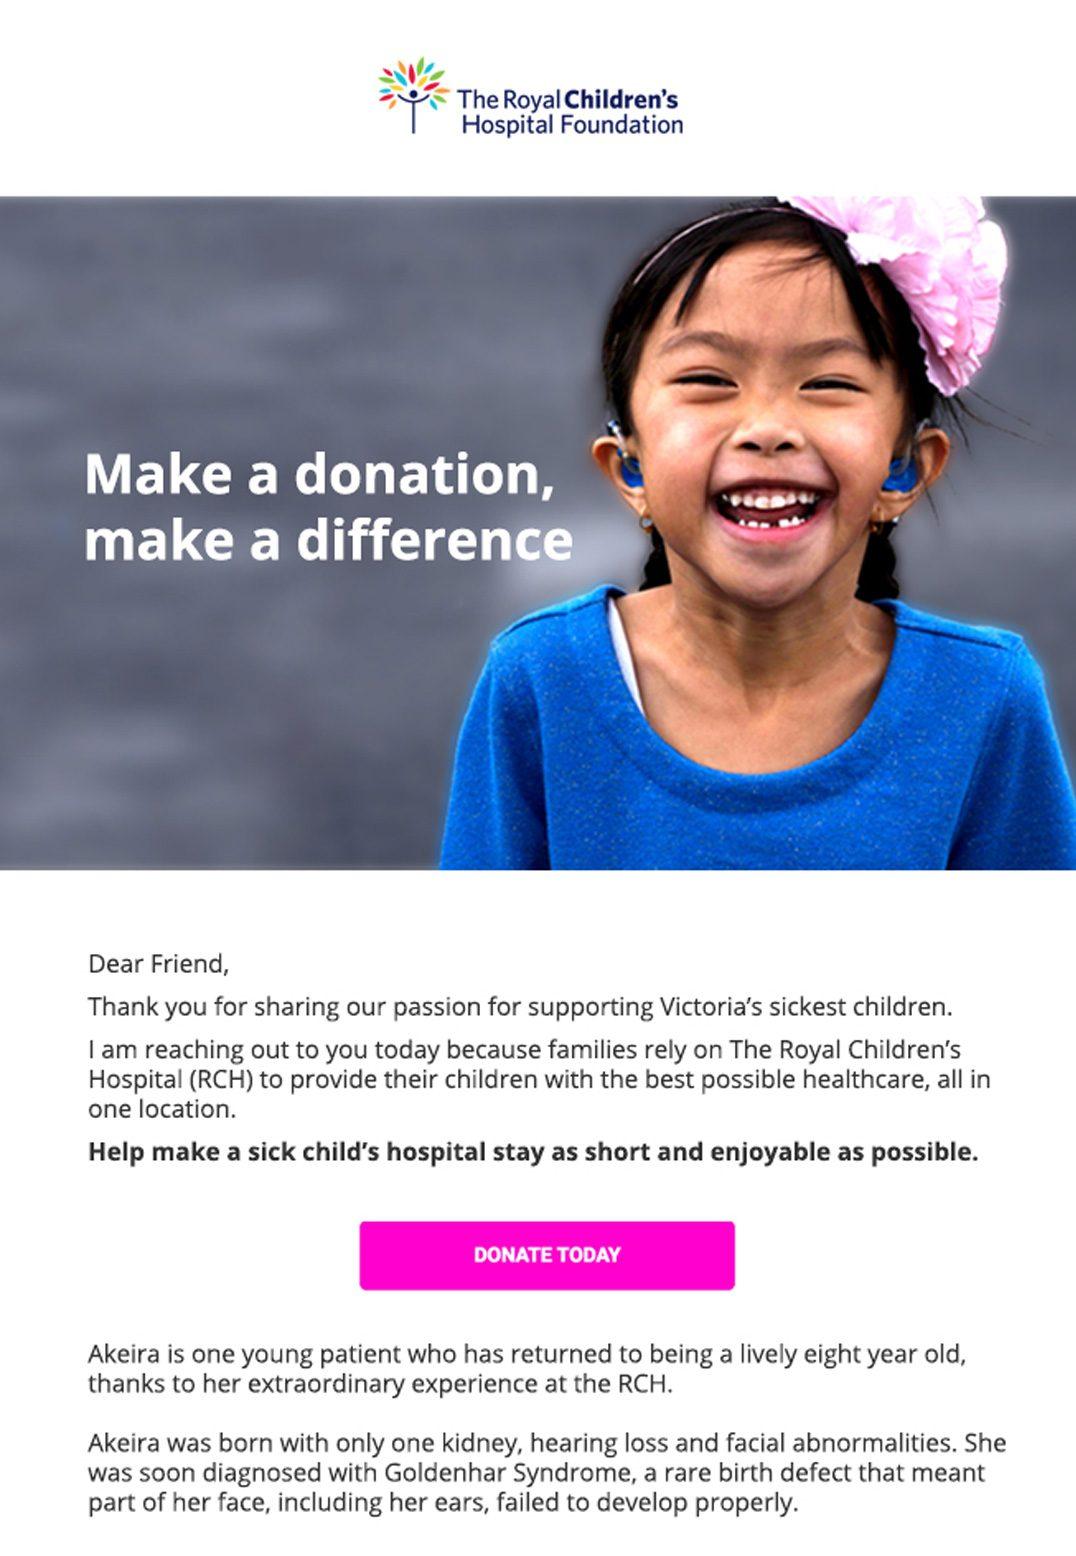 The Royal Children's Hospital Foundation email example